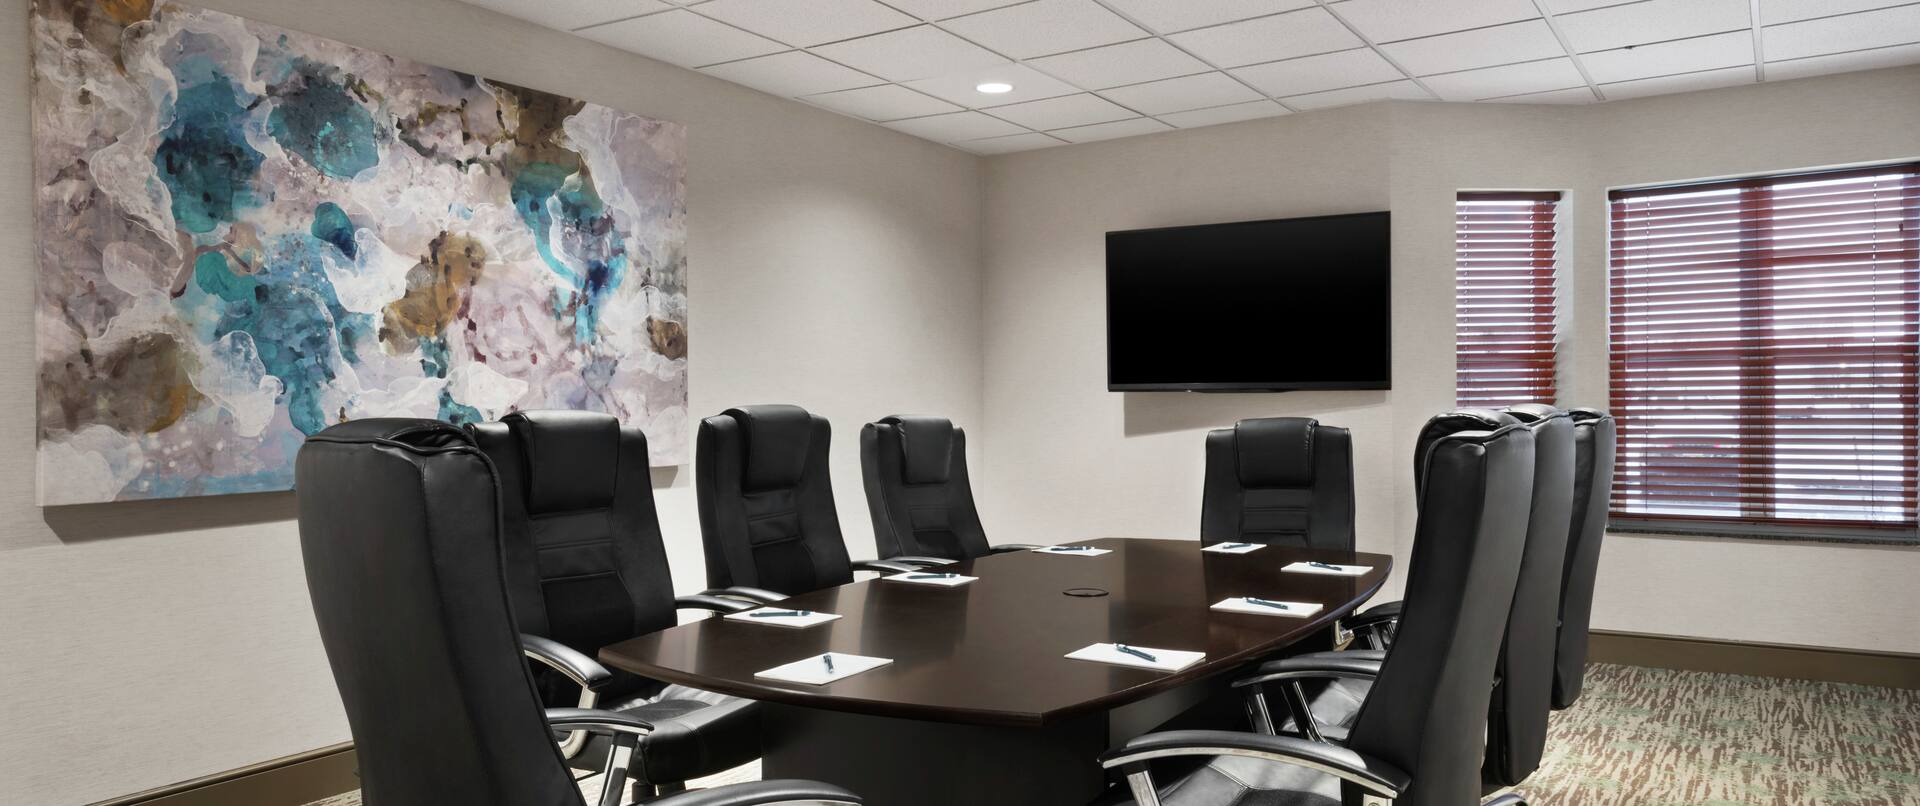 Meeting Room with Conference Table and Chairs